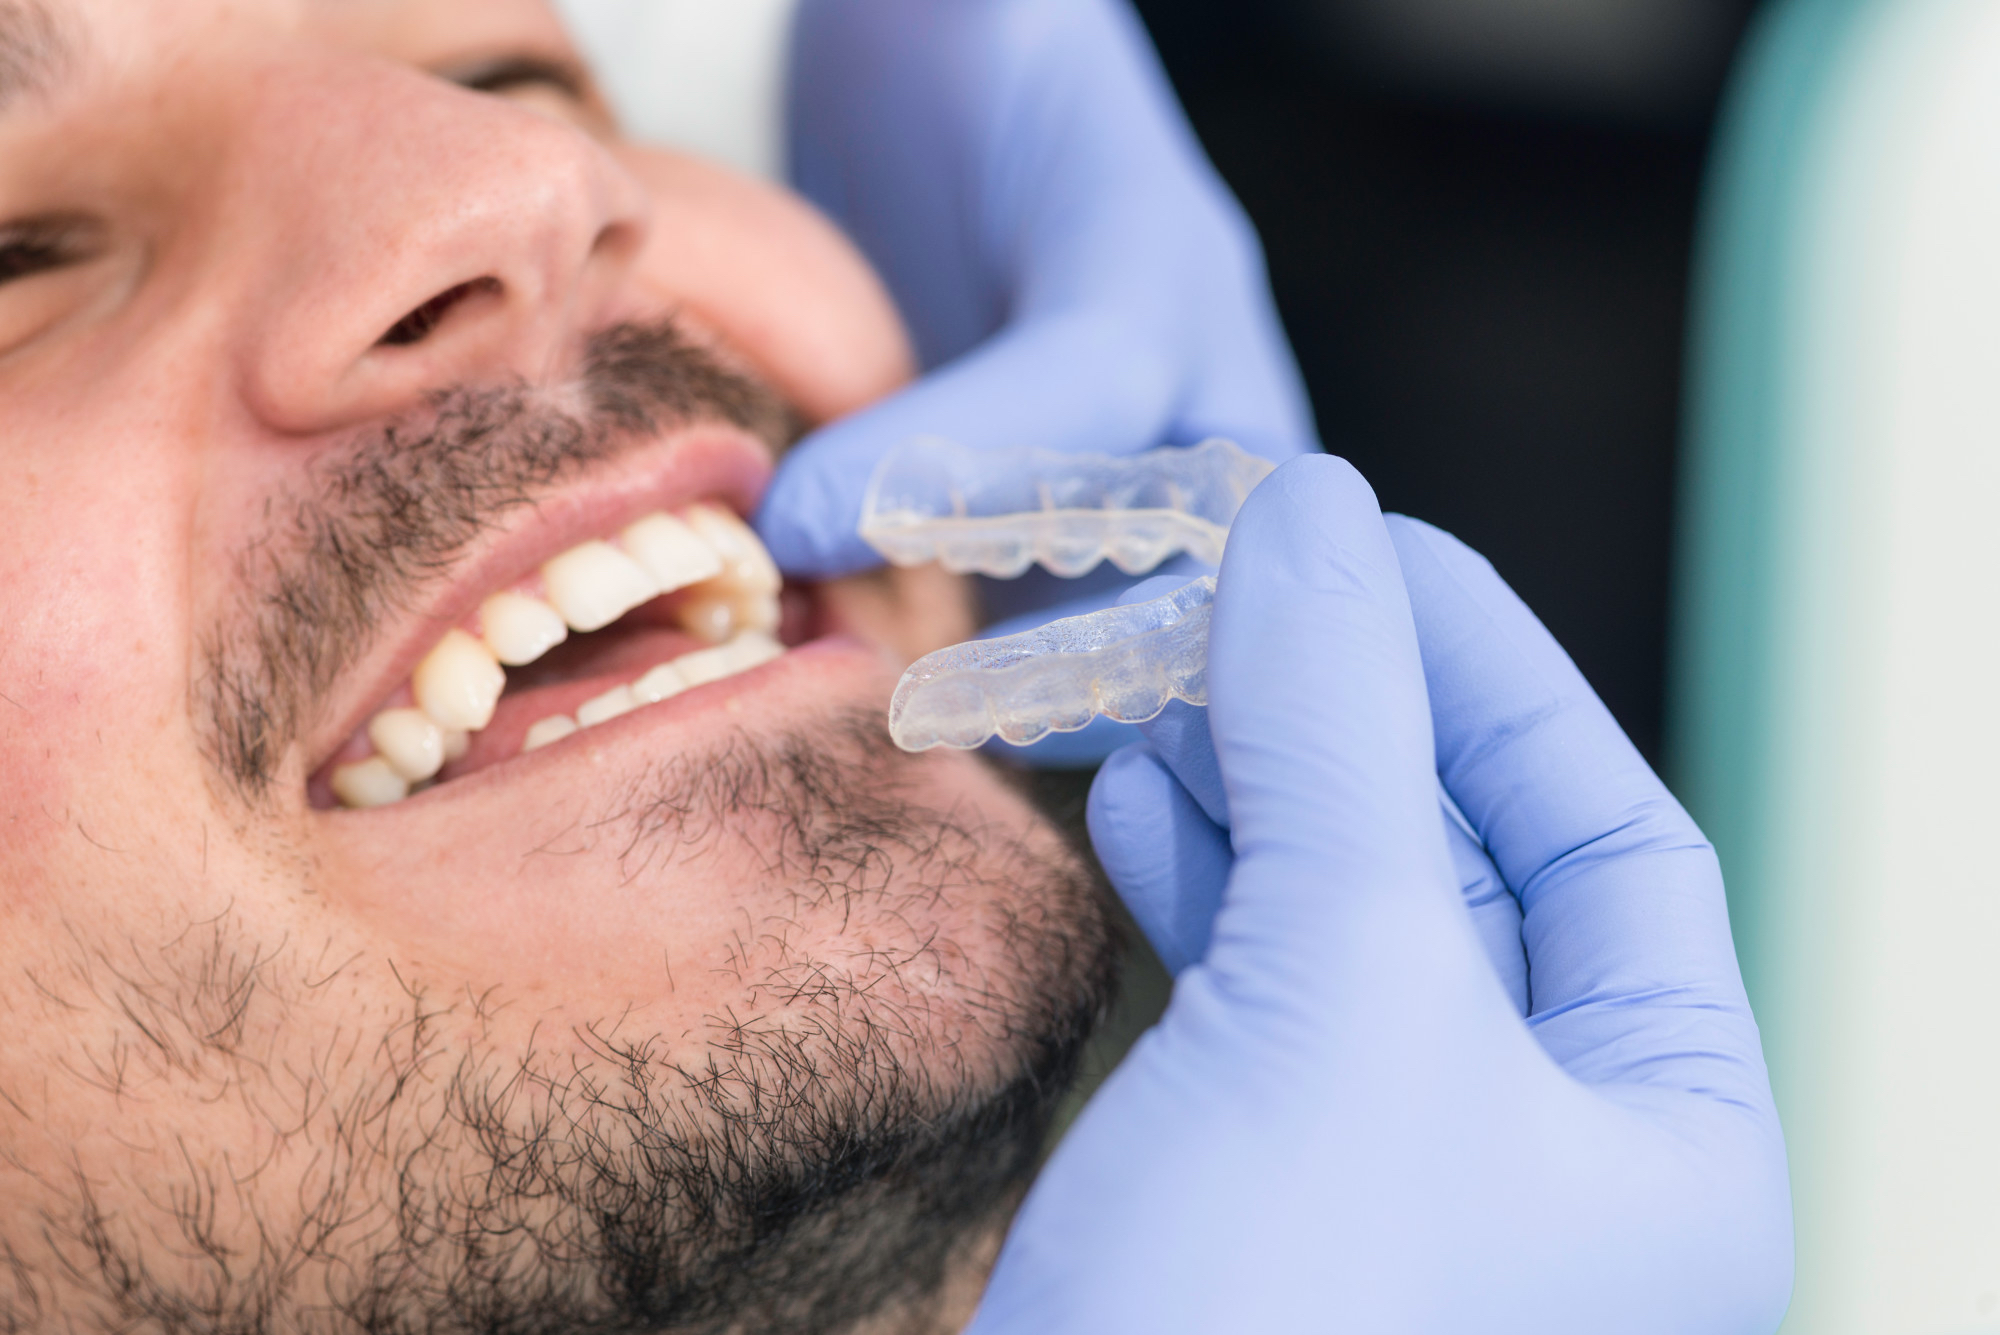 5 Things to Know About Getting Braces as an Adult